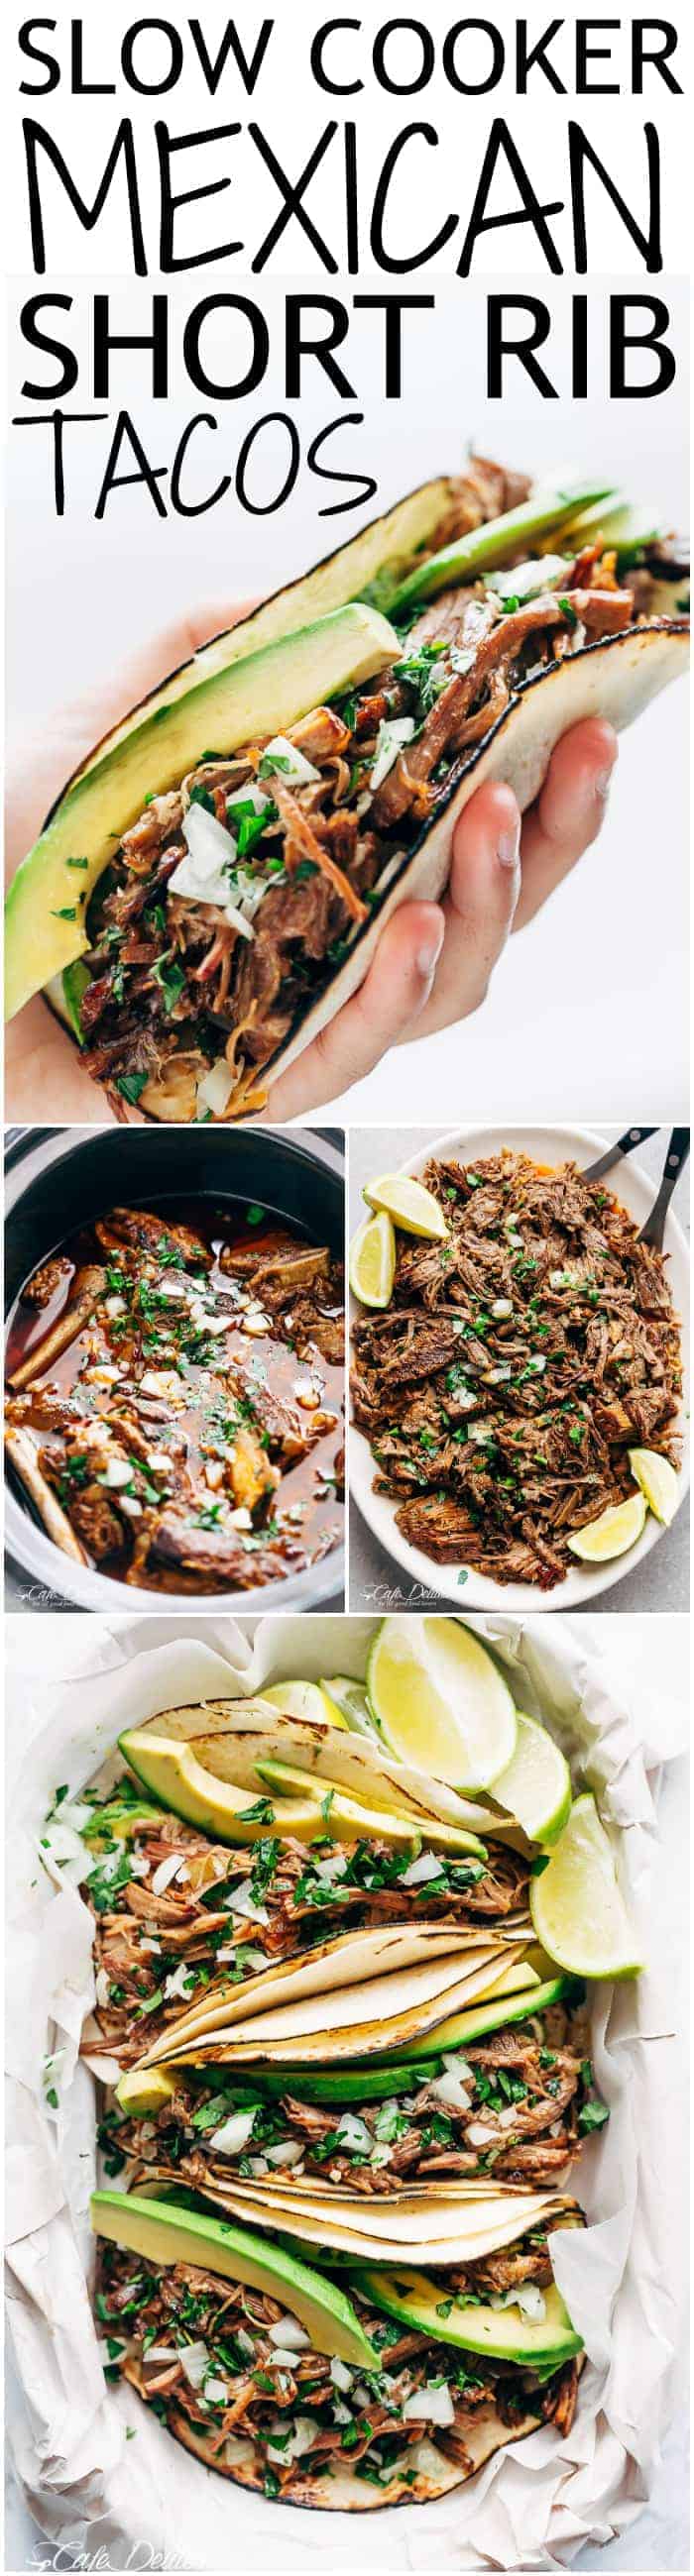 Slow Cooker Beef Short Ribs full of barbacoa flavours! Meat so tender it falls off the bone before being stuffed into Taco's and served with Avocado! | https://cafedelites.com